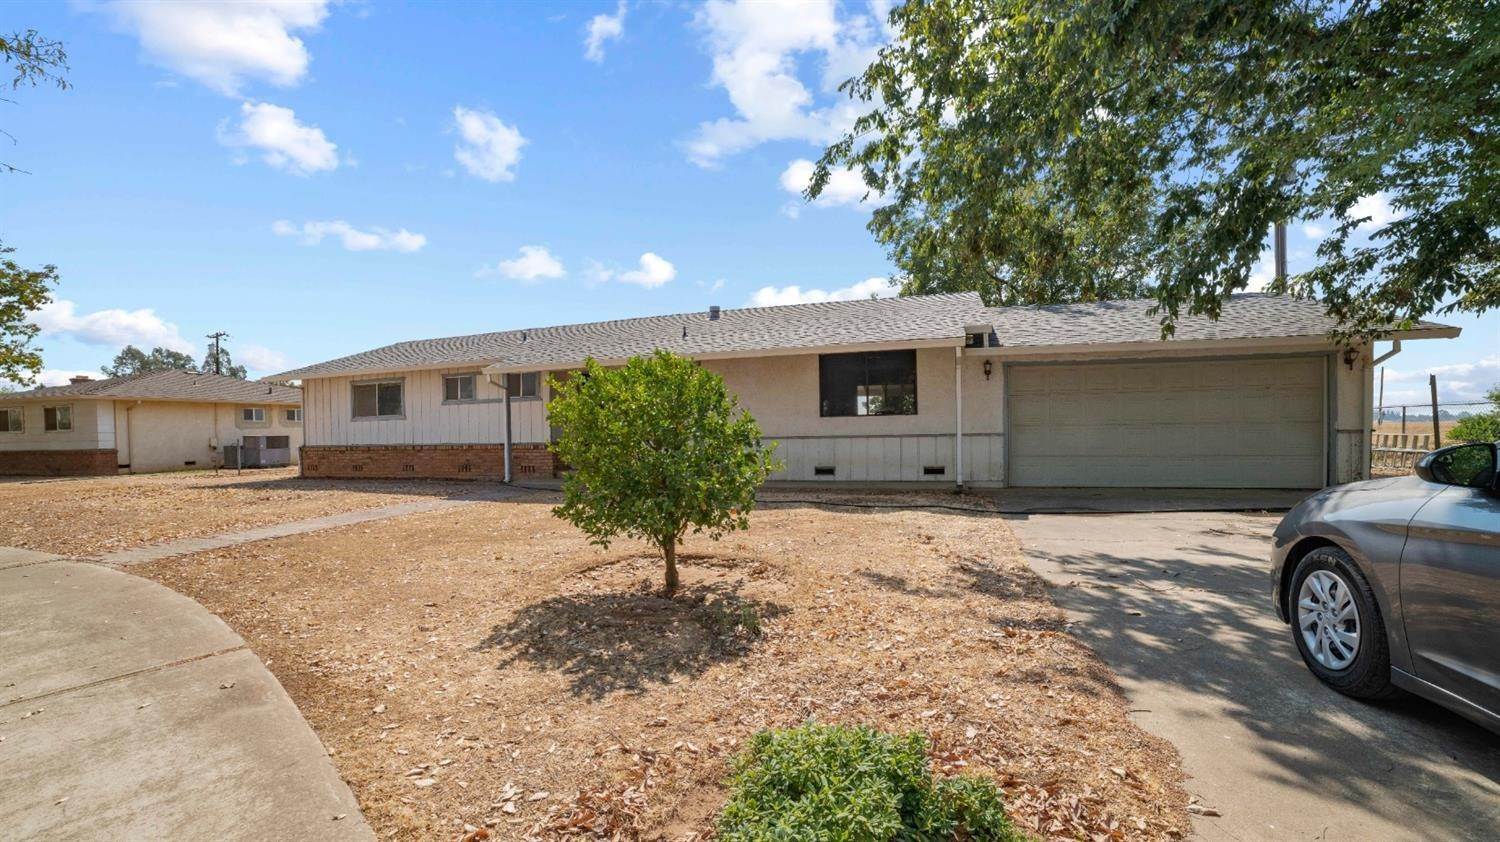 29. Single Family Homes for Active at 10000 Florin Road Sacramento, California 95829 United States